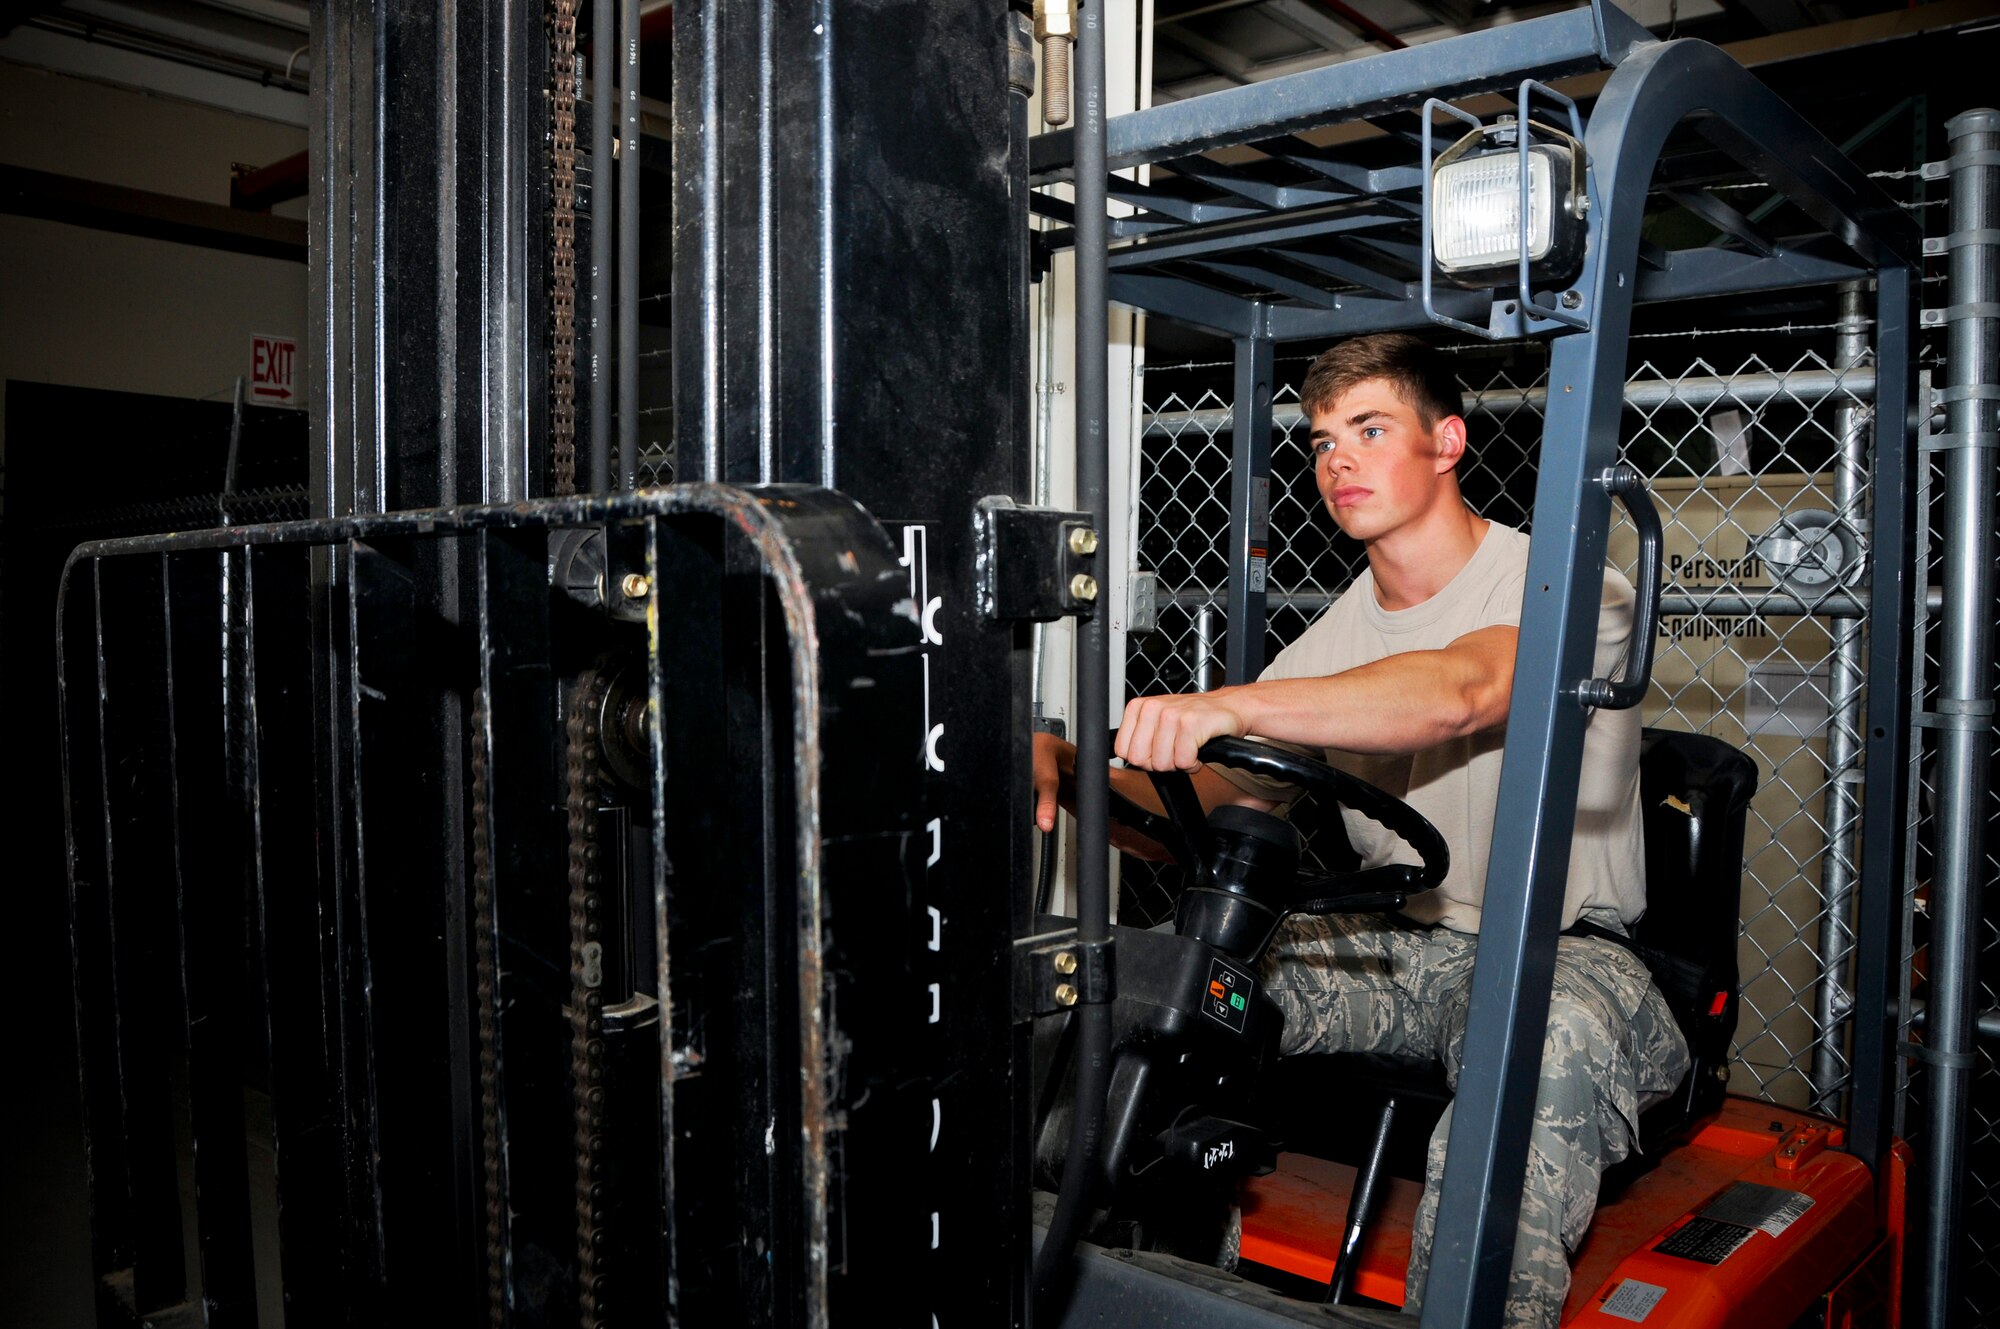 Airman 1st Class Parker Dunn, 188th Logistics Readiness Squadron vehicle operator, maneuvers a forklift to move packages June 4, 2015, at Ebbing Air National Guard Base, Fort Smith, Ark. Dunn’s exceptional work ethic has brought him high esteem among his fellow Airmen and earned him the July 2015 The Flying Razorback spotlight. (U.S. Air National Guard photo by Senior Airman Cody Martin/Released)